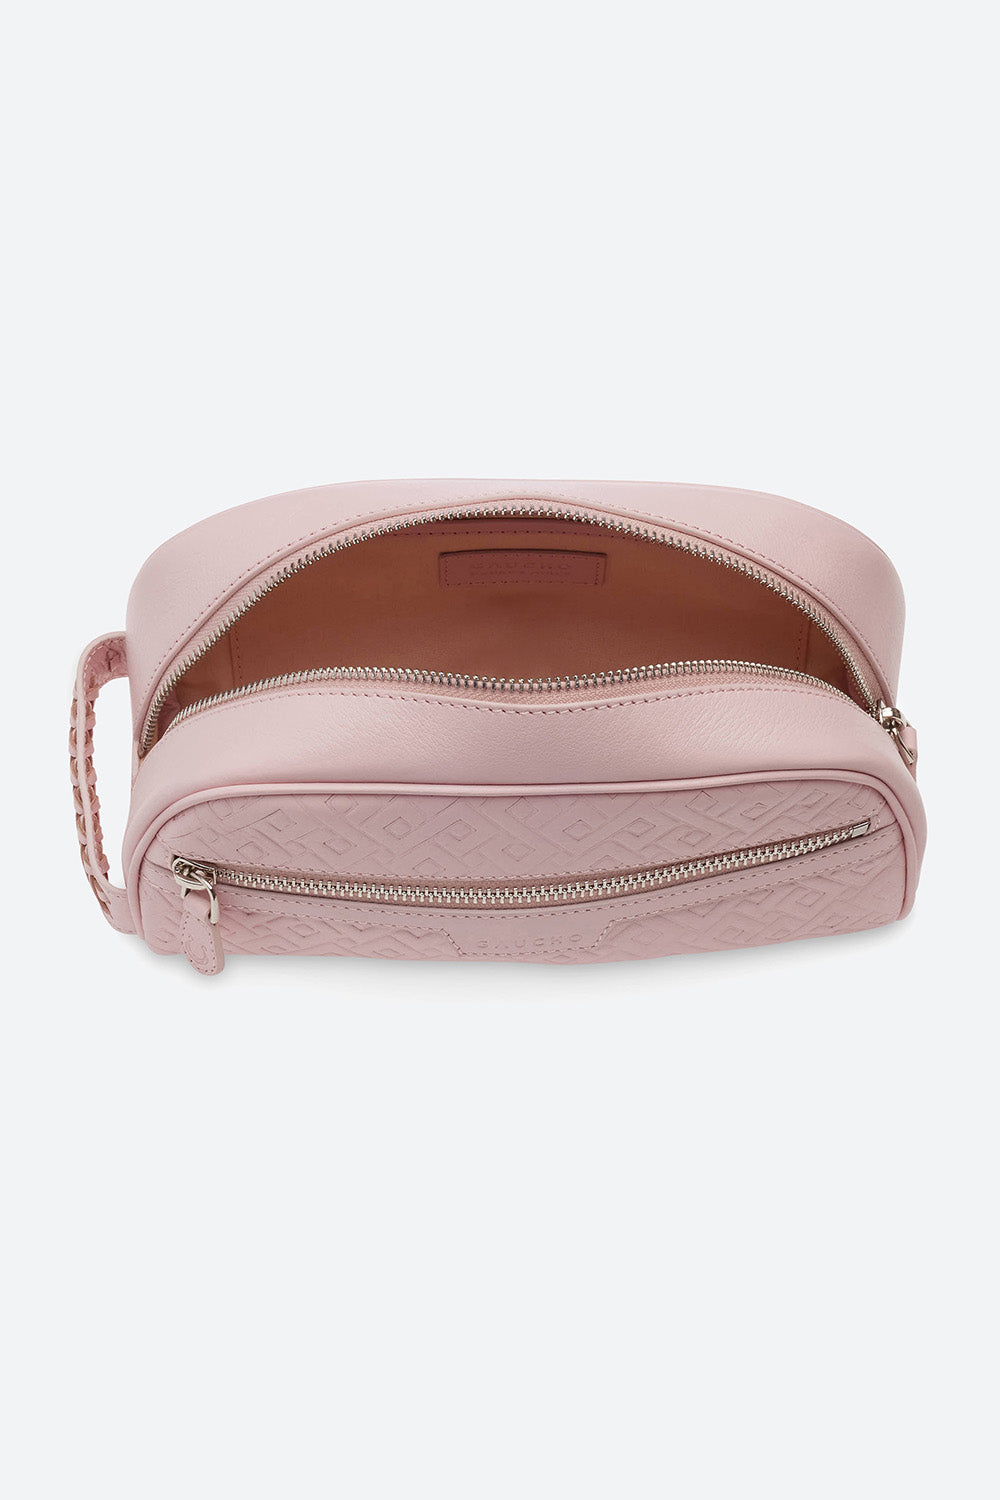 Travel Kit in Peony Pink